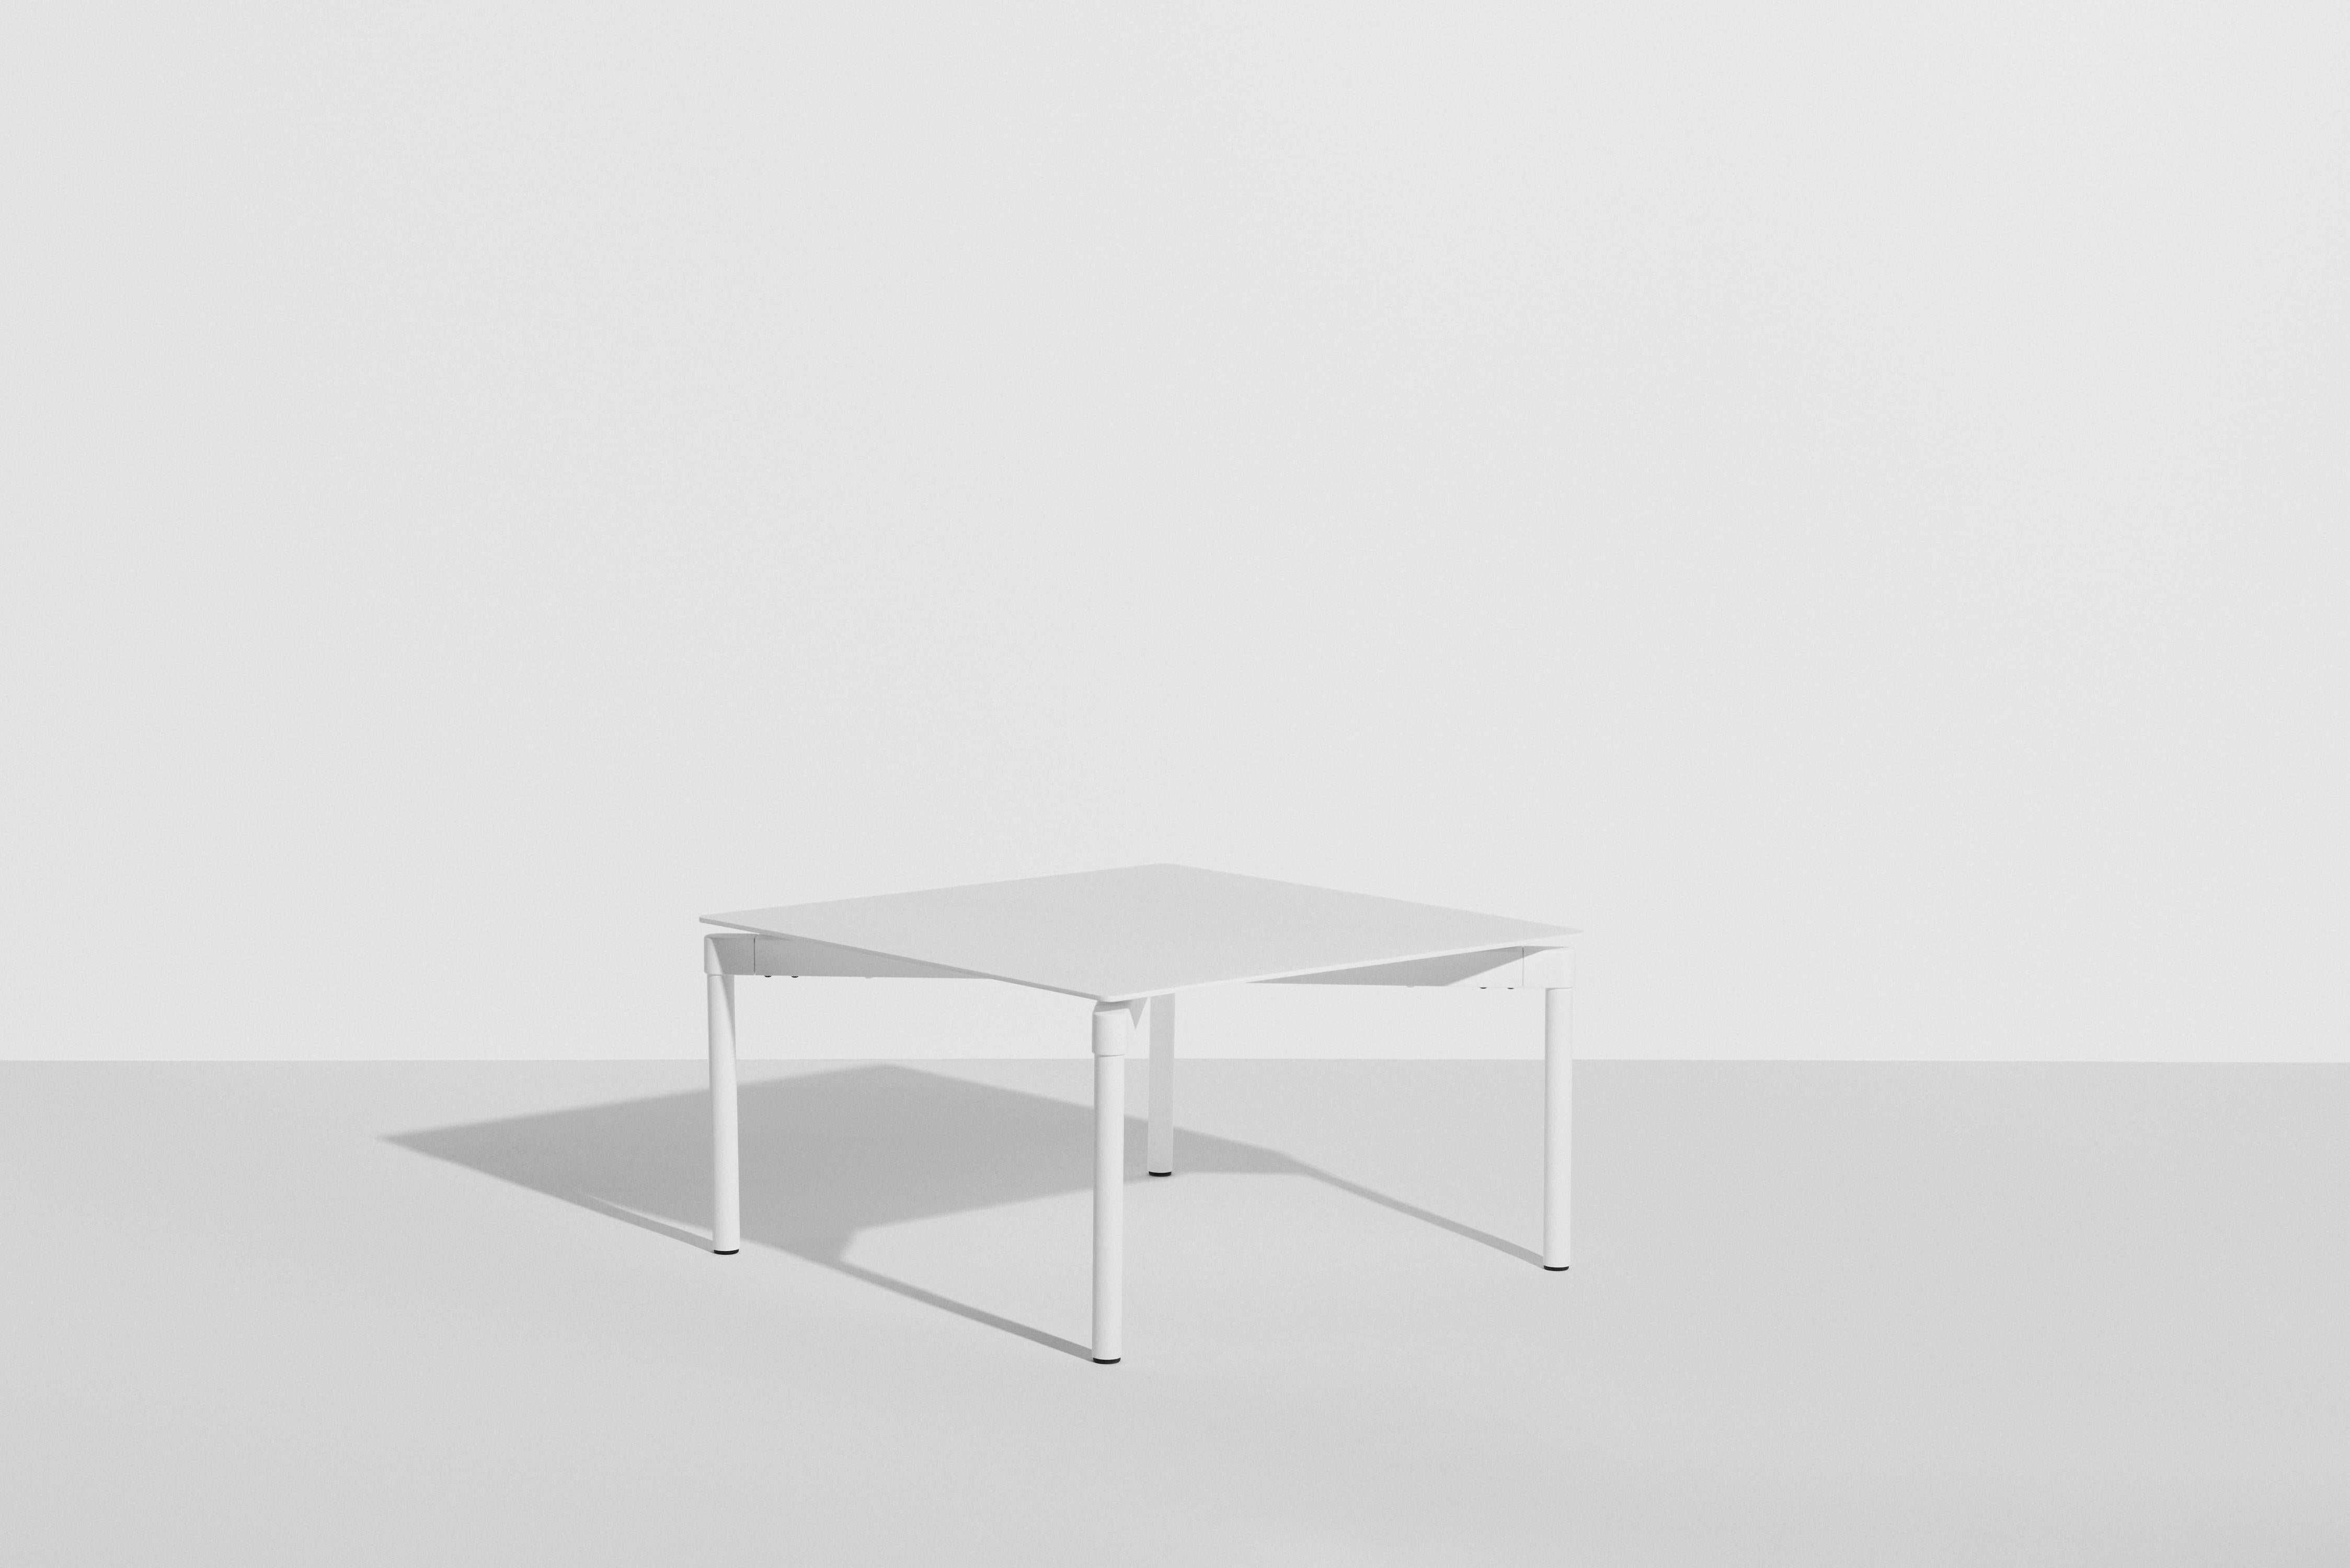 Chinese Petite Friture Fromme Coffee Table in White Aluminium by Tom Chung, 2020 For Sale